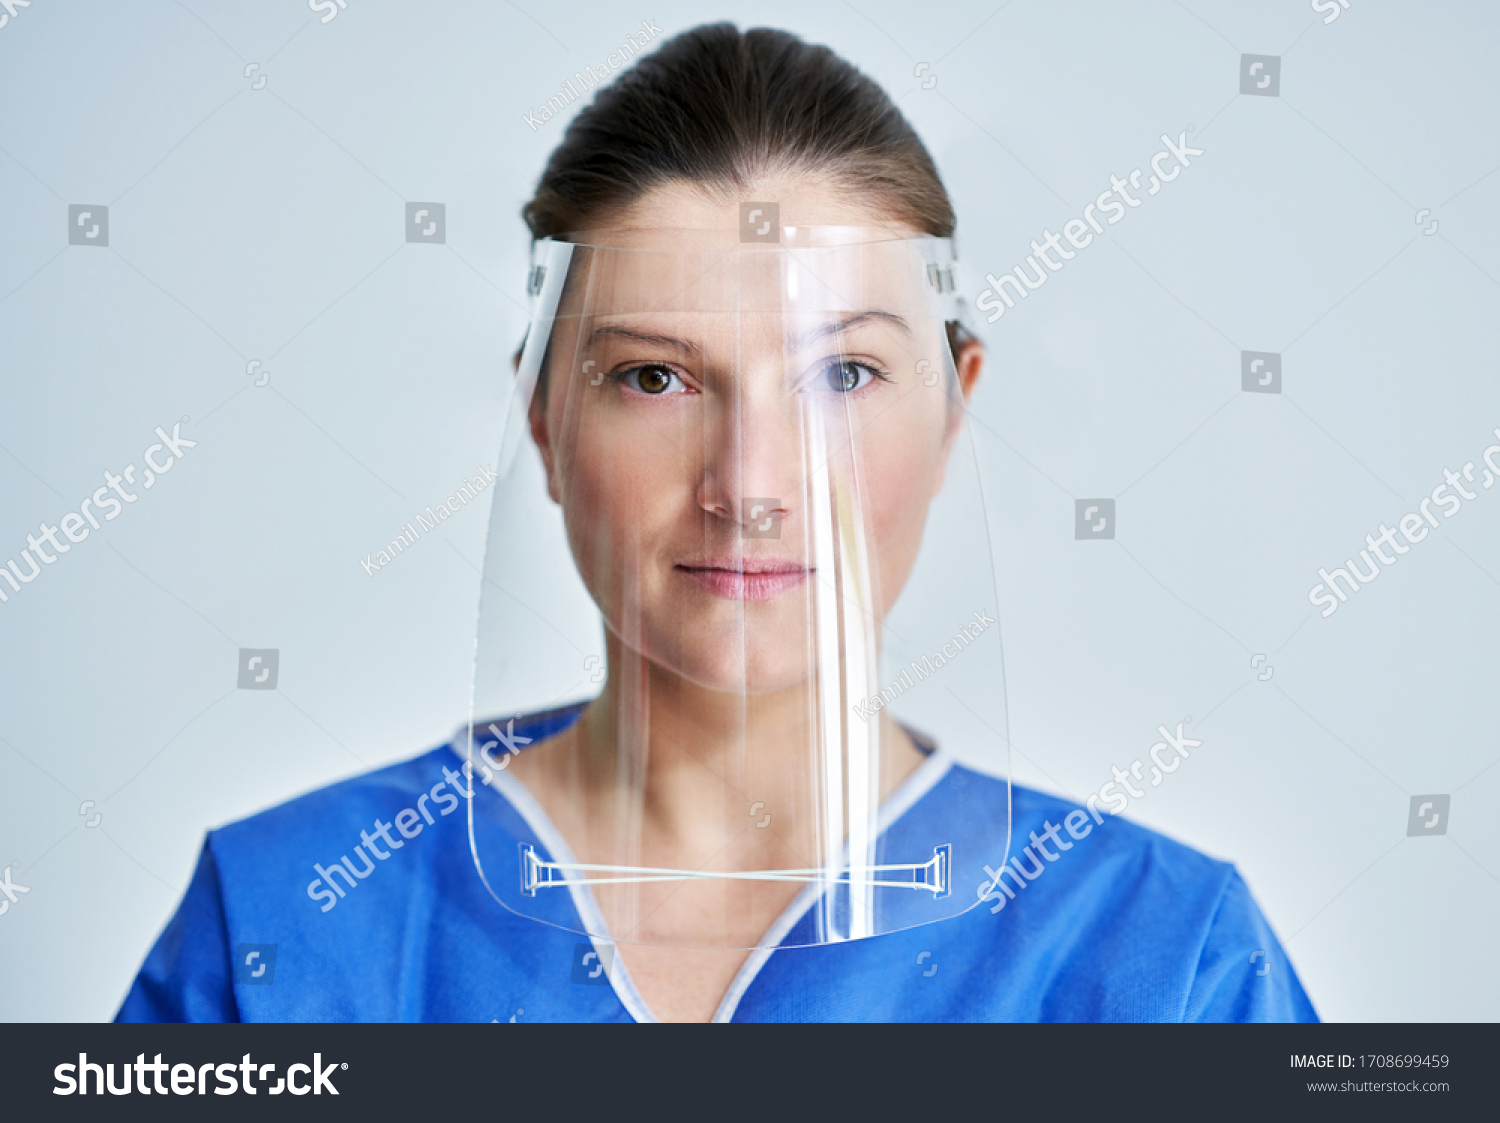 Close up portrait of female medical doctor or nurse wearing face shield #1708699459